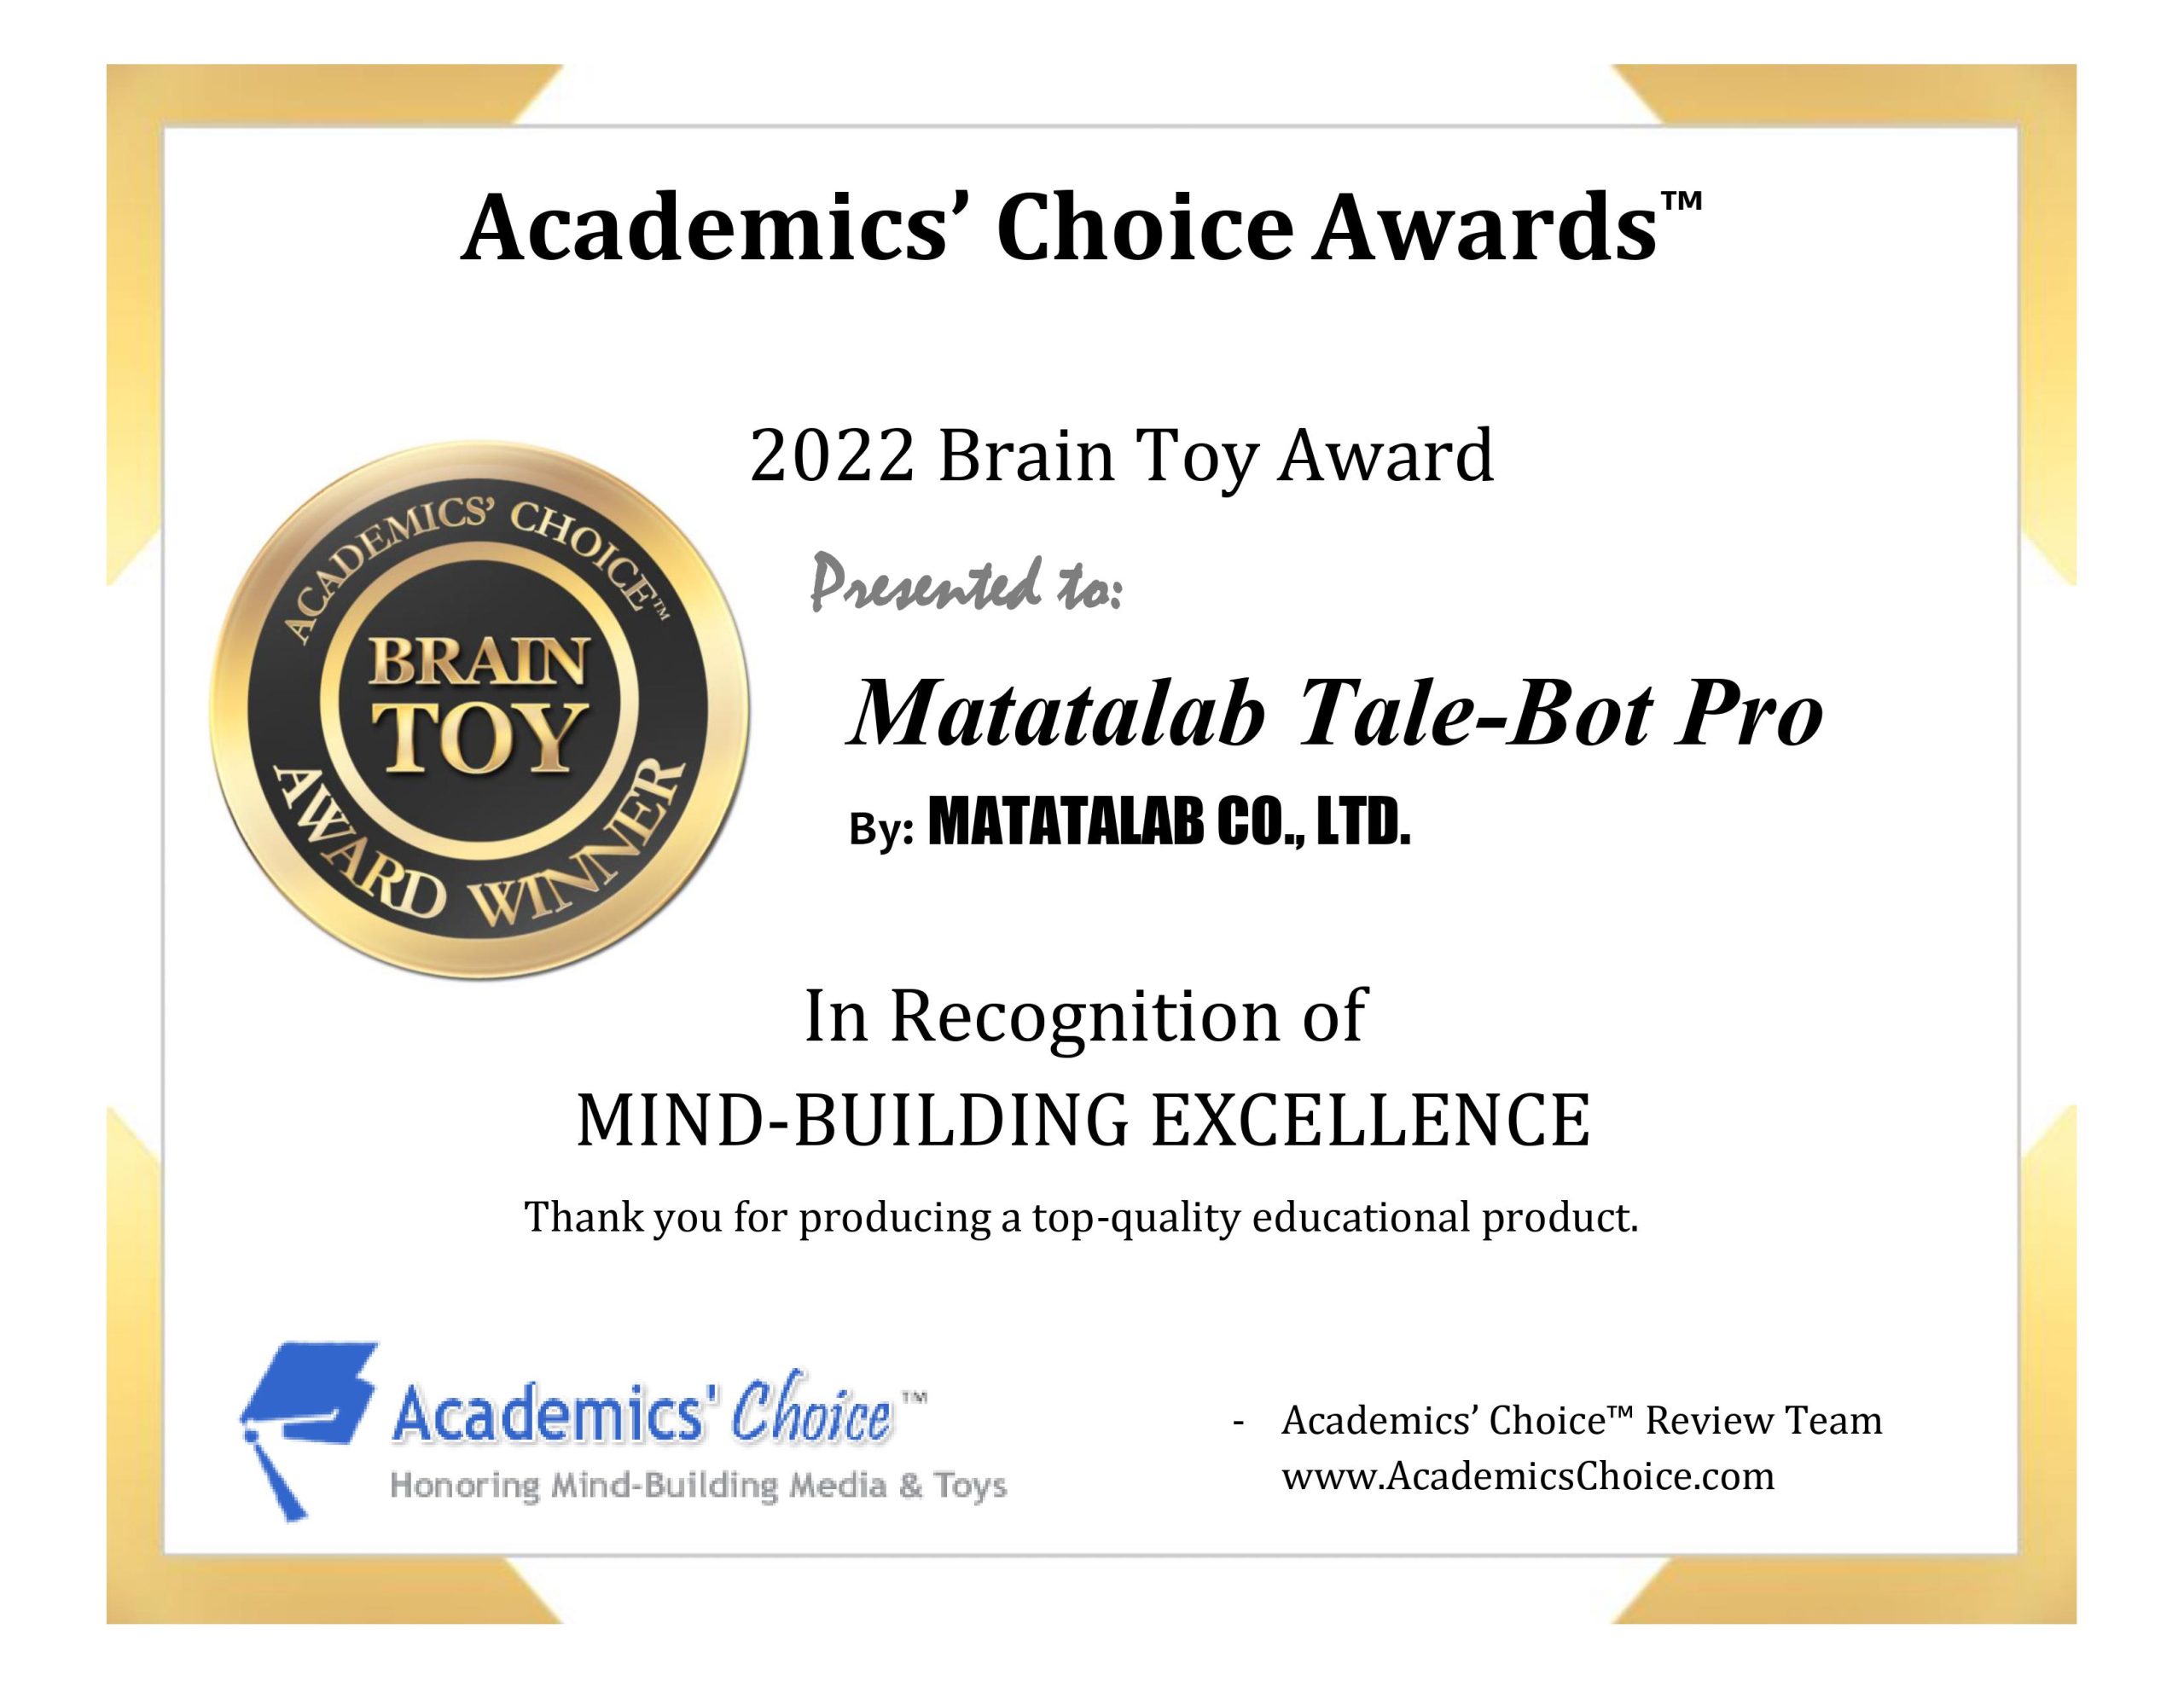 Matatalab Tale-Bot Pro Earns 2022 Academics’ Choice Brain Toy Award for Mind-Building Excellence